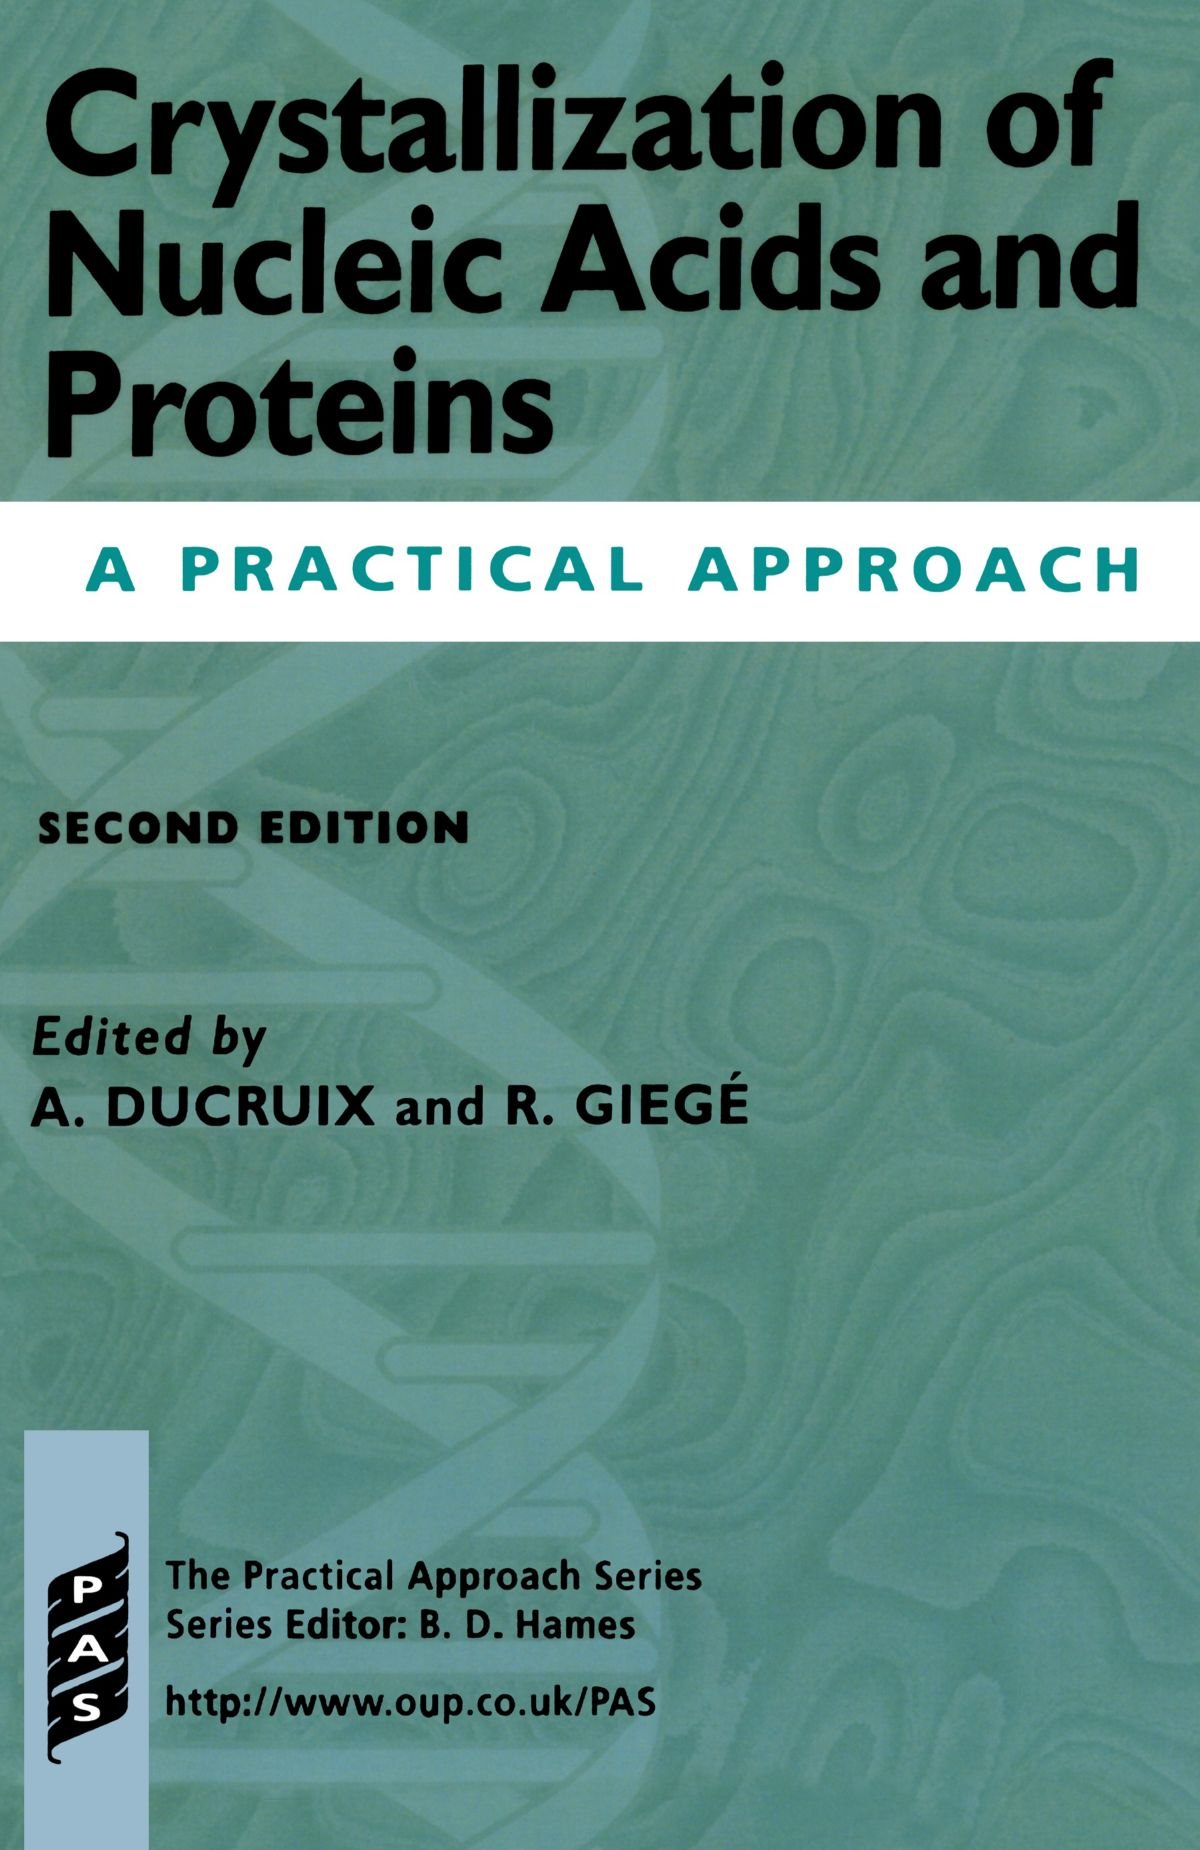 Crystallization of Nucleic Acids and Proteins: A Practical Approach (Practical Approach Series, 210)